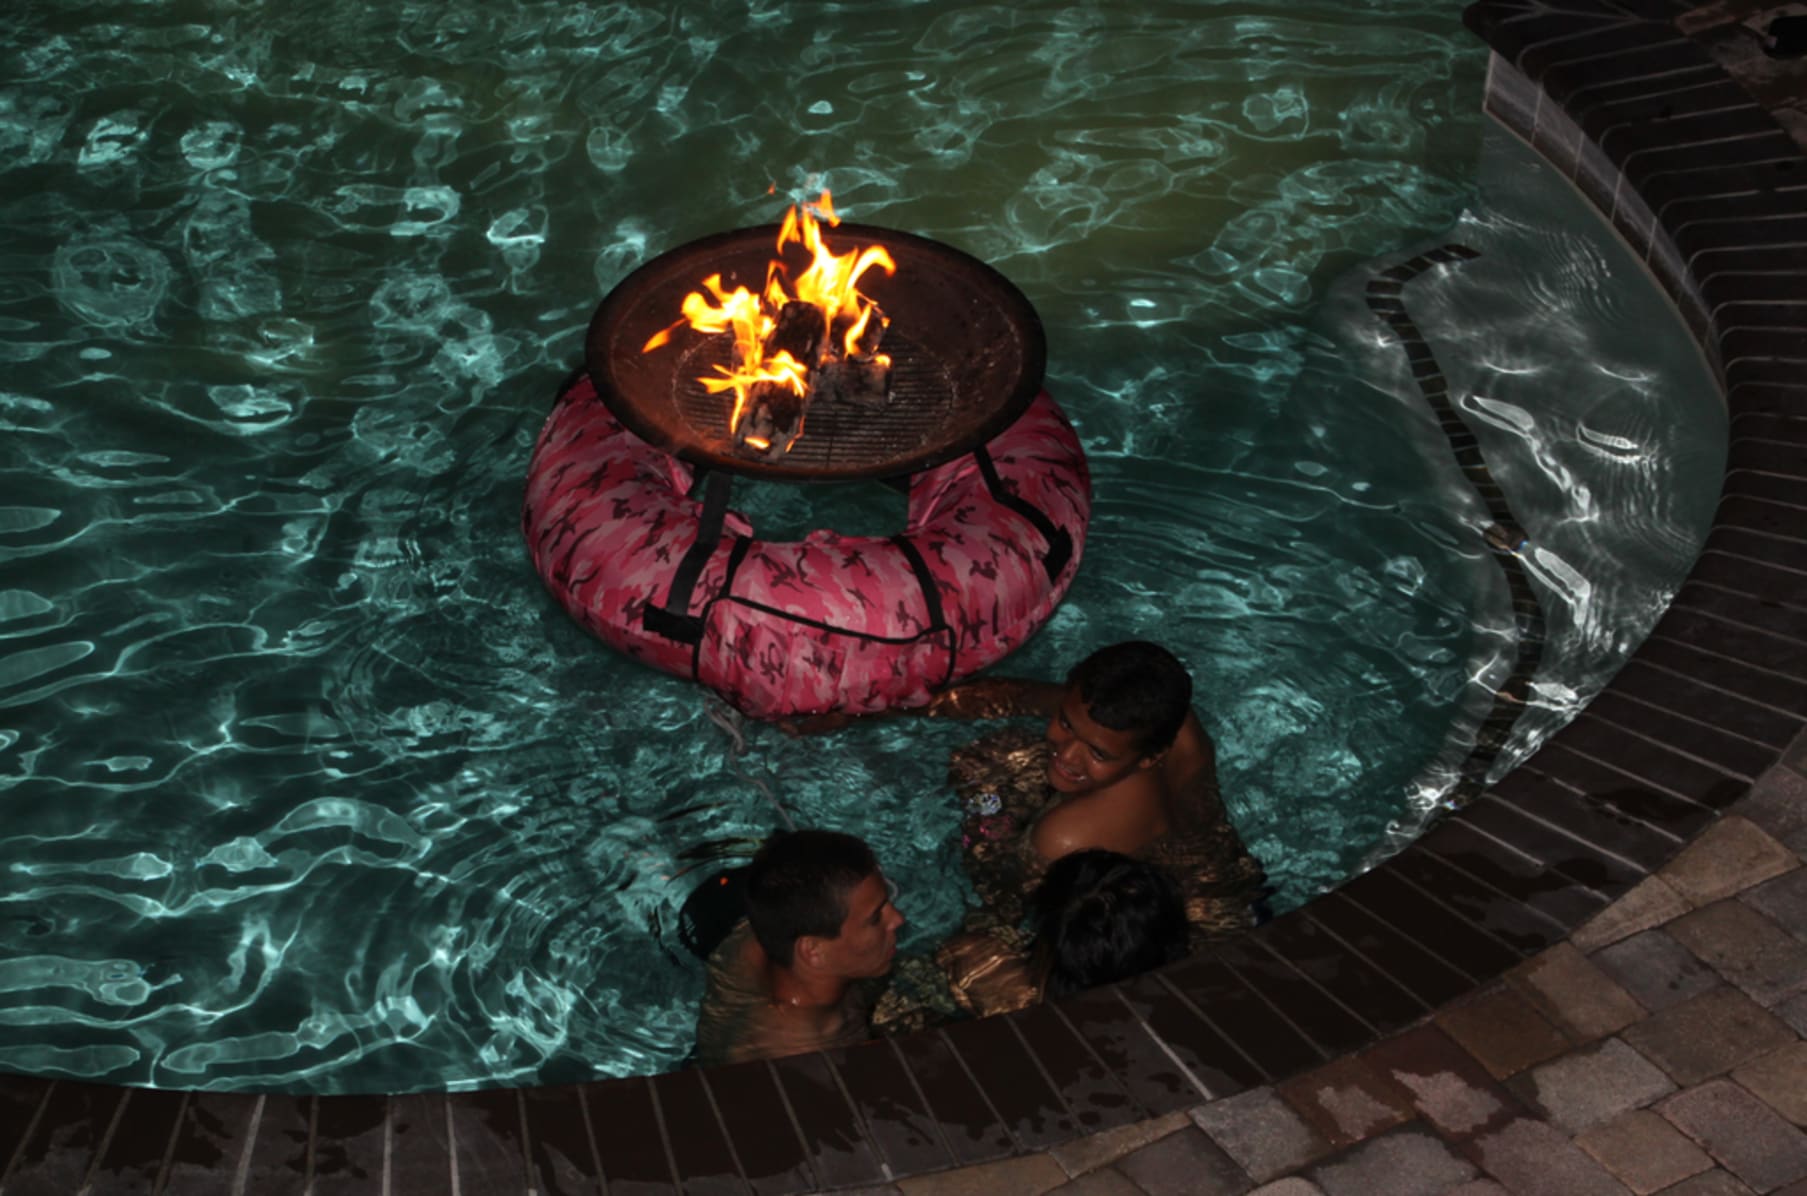 Floating Fire Pit Bbq Indiegogo, Pyre Floating Fire Pit